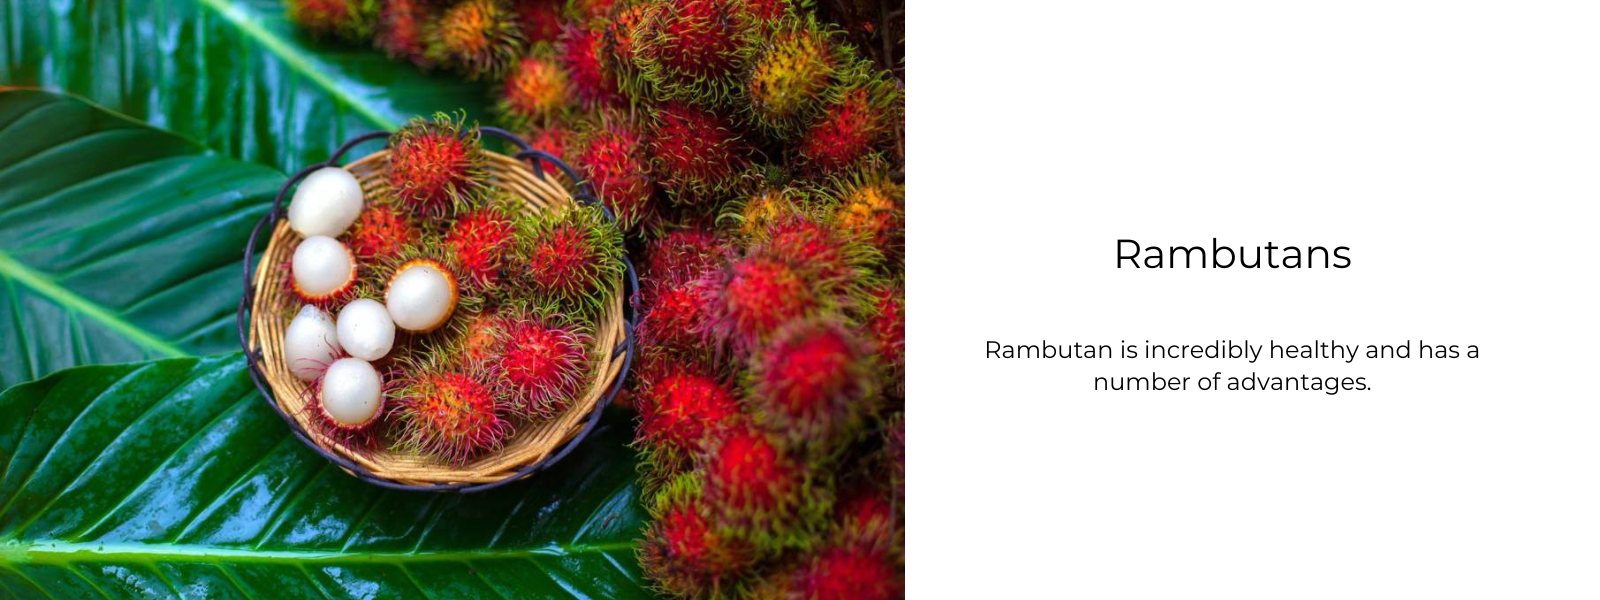 Rambutans - Health Benefits, Uses and Important Facts